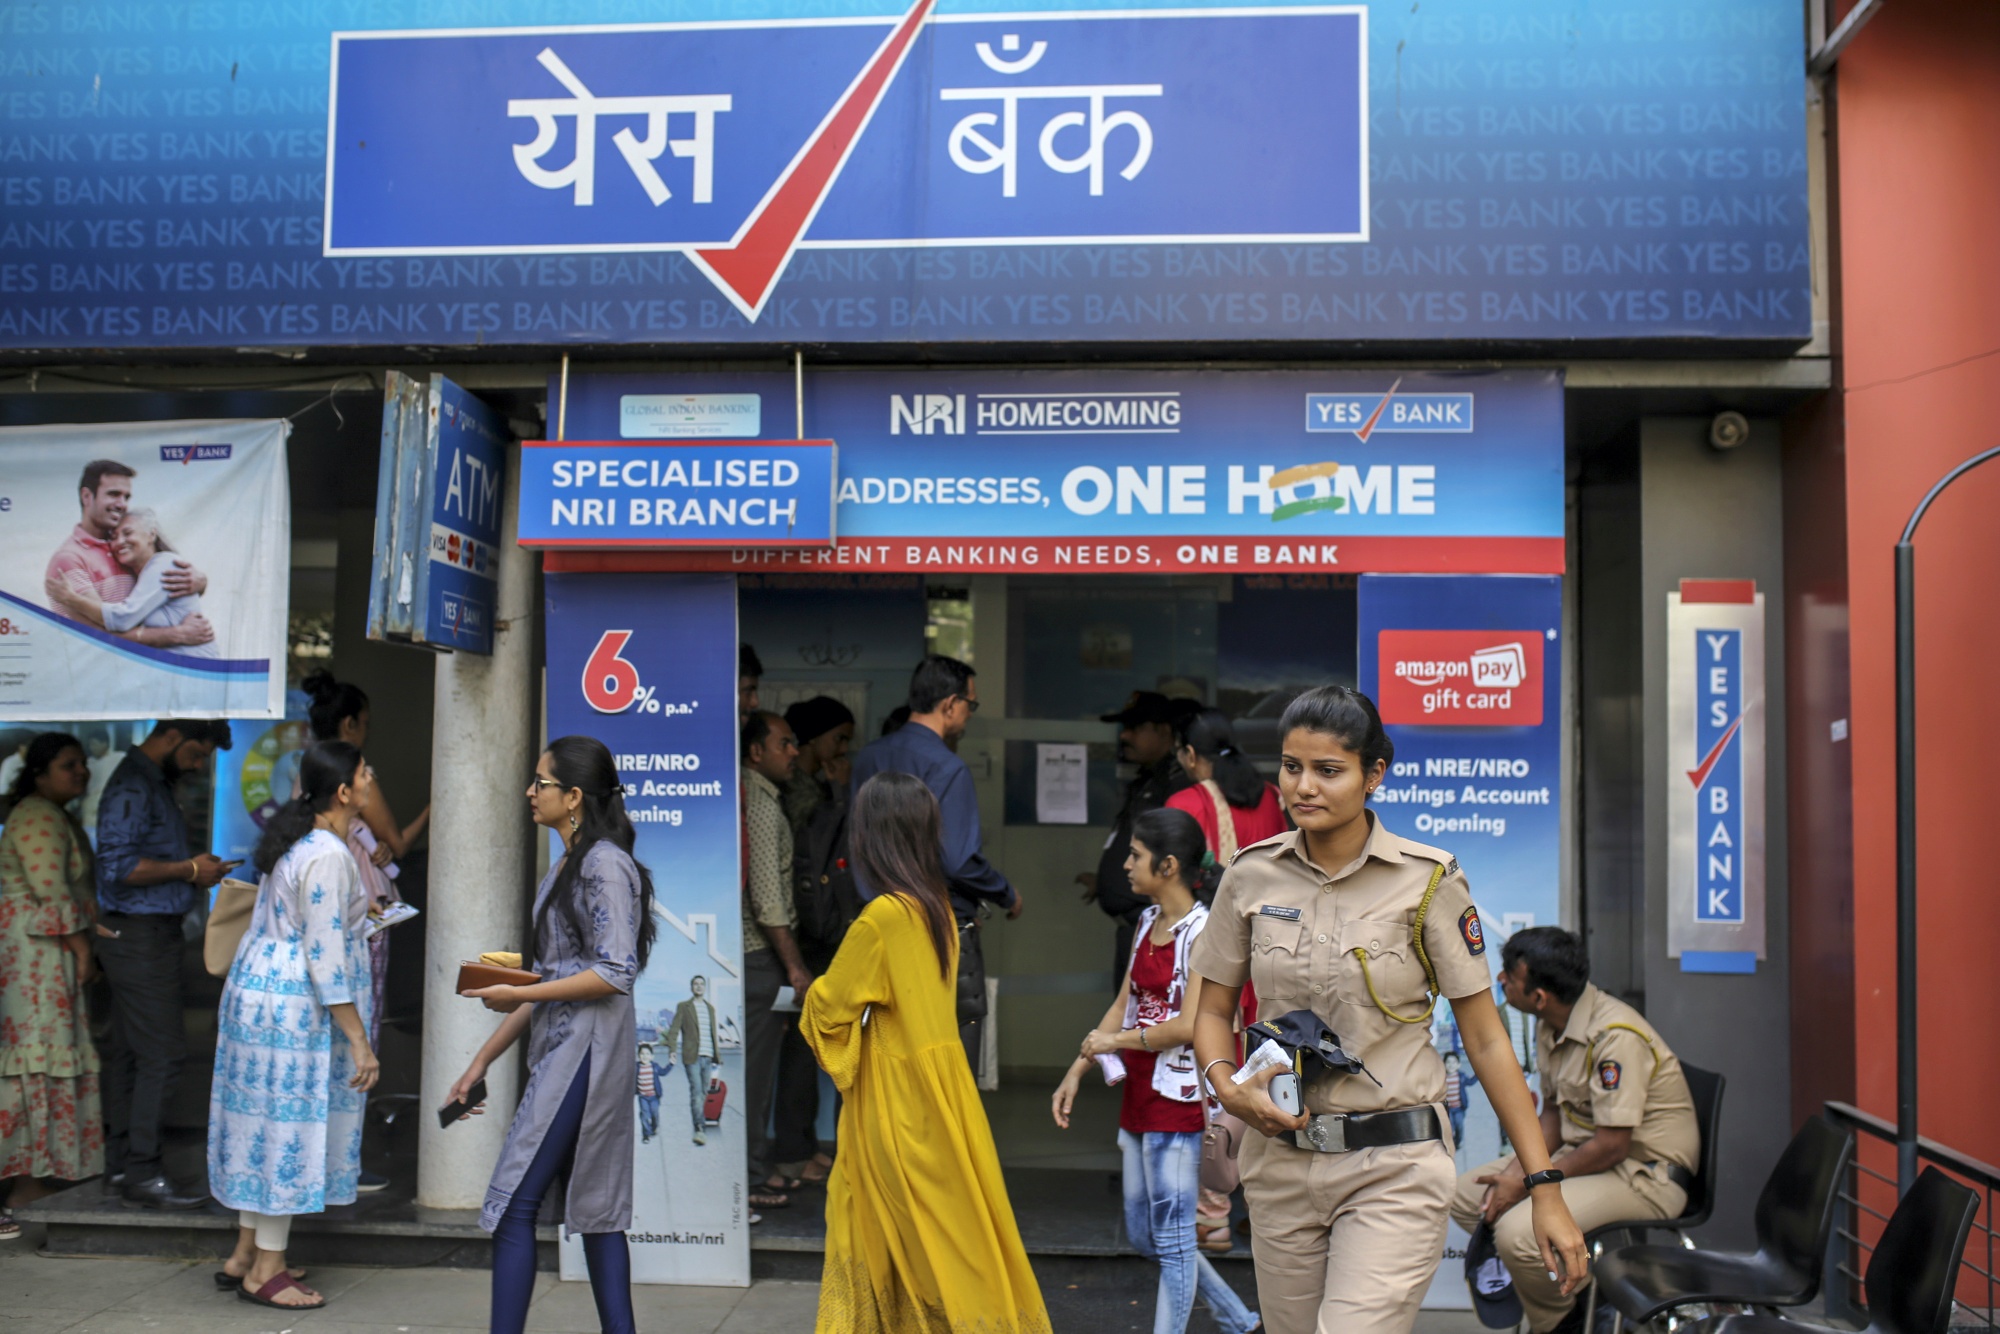 India's Biggest Lender to Invest $332 Million in Yes Bank Rescue - Bloomberg